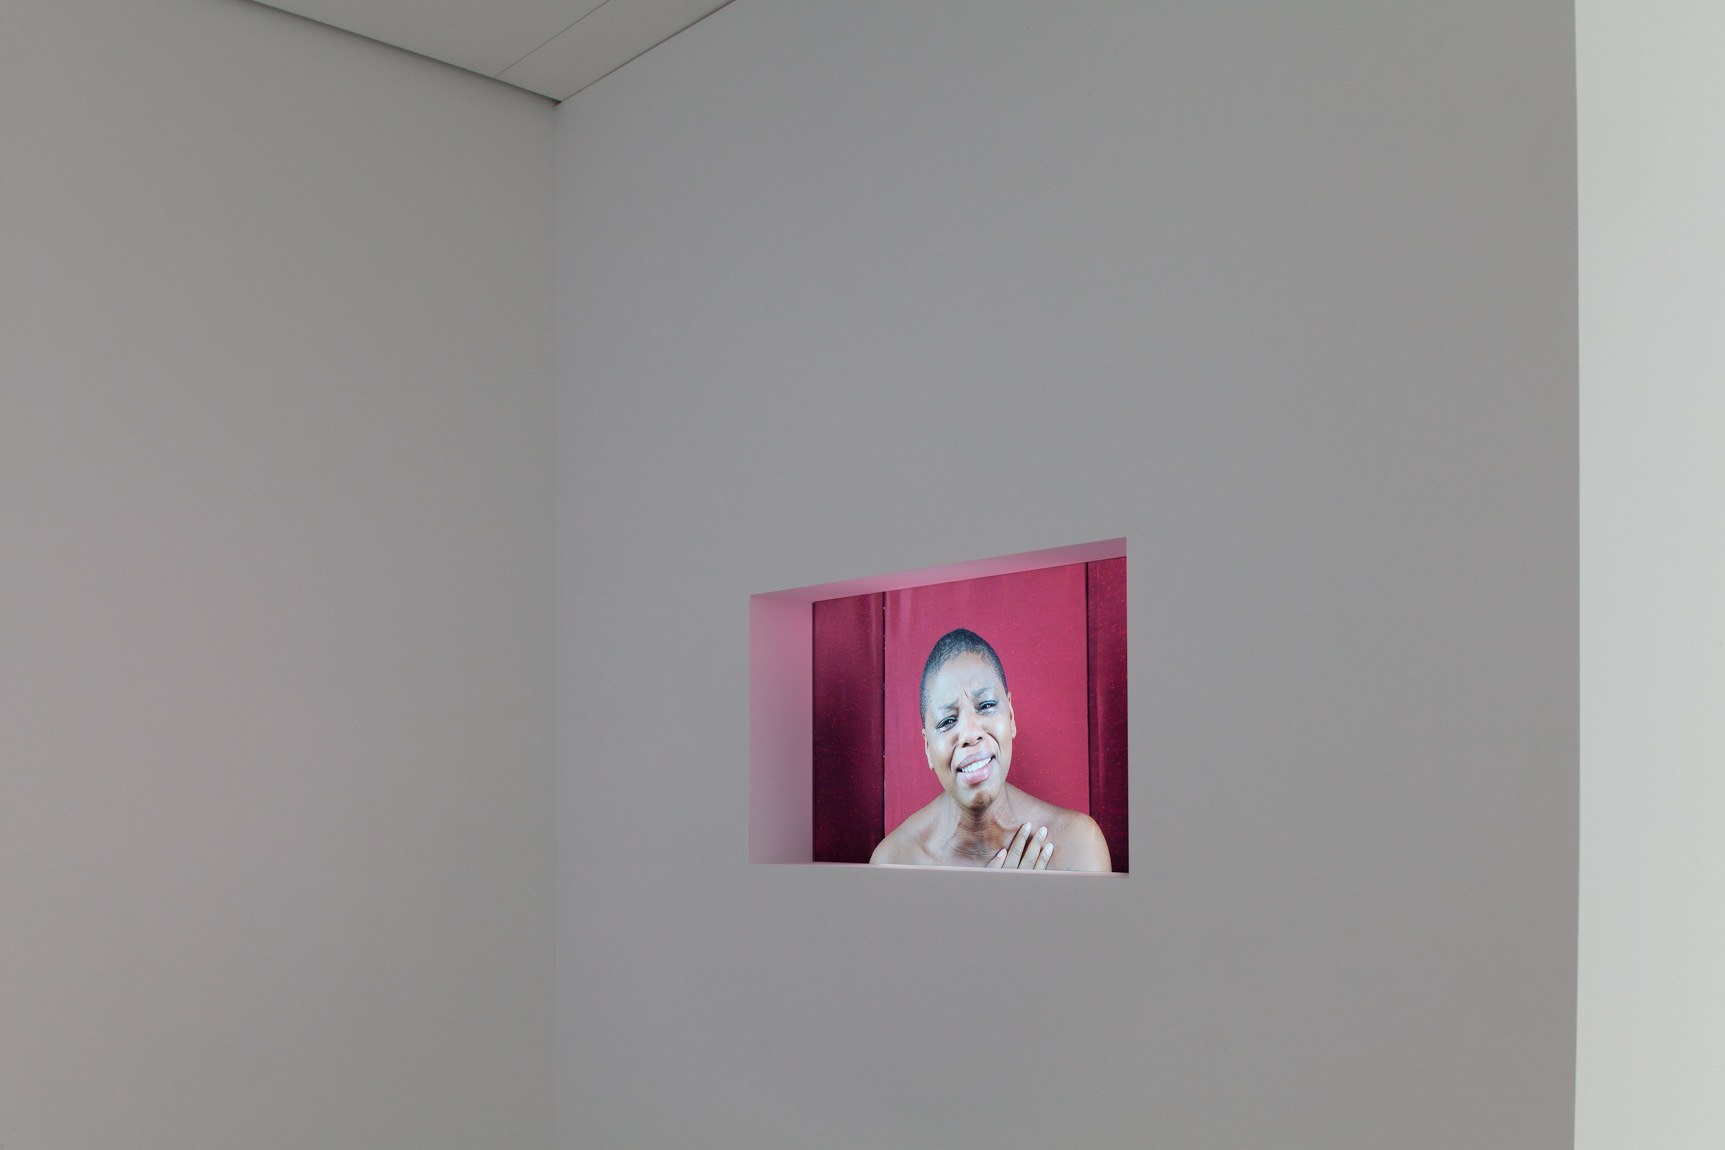 An exhibition view of Nina Saro-Wiwa's film "Sarogua Mourning," indented into a gallery wall.